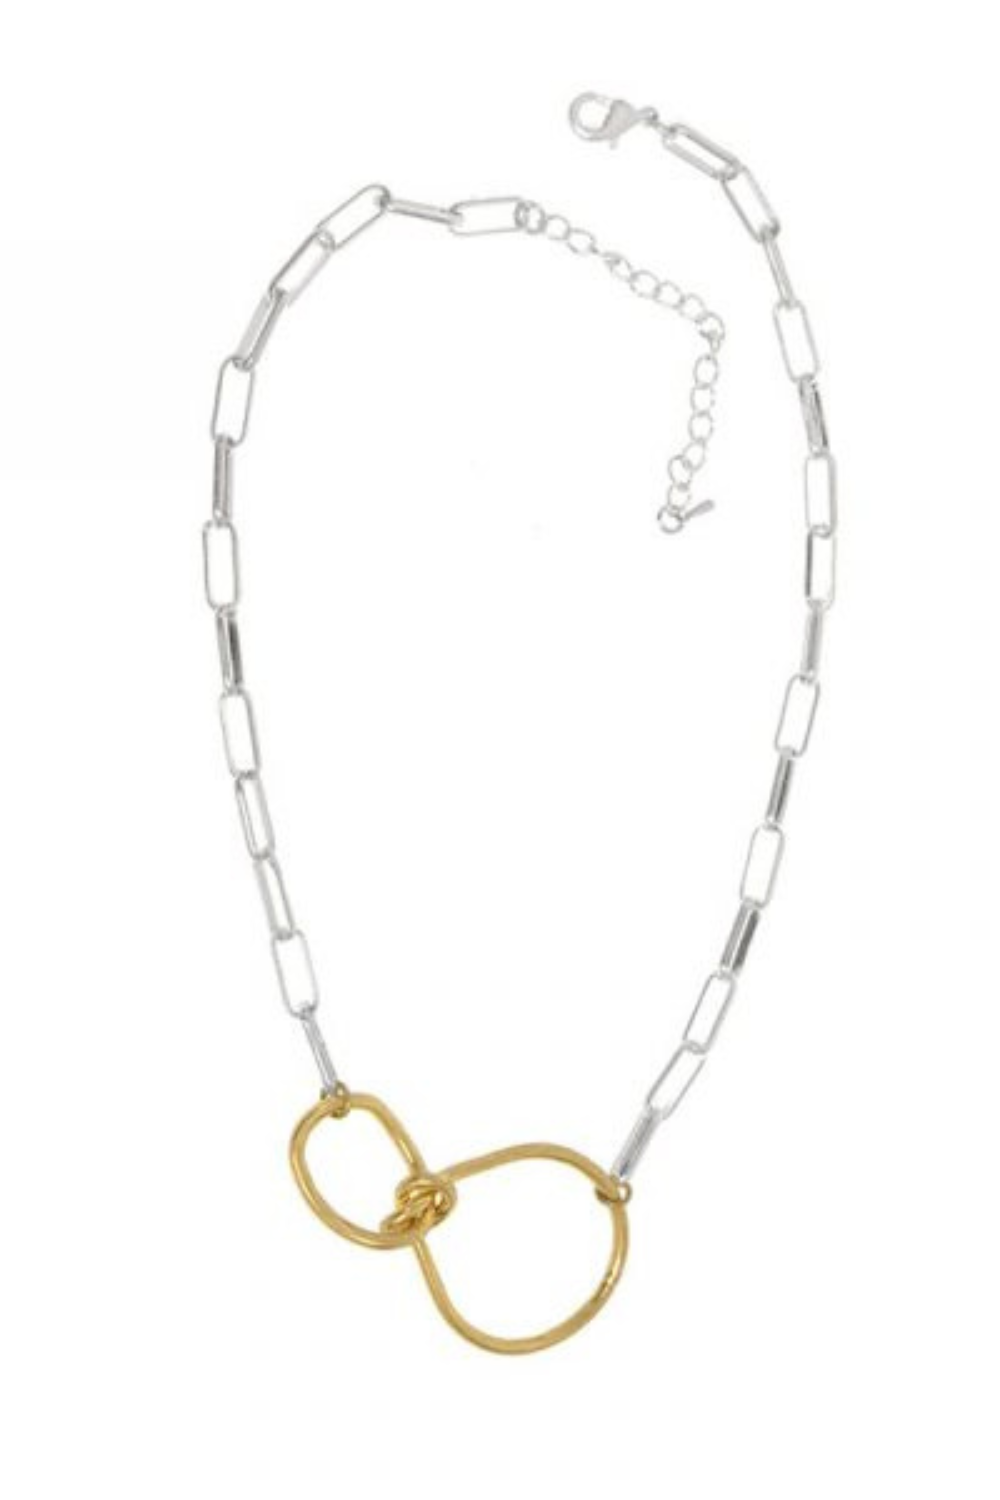 Gold Knotted Rings on Silver Link Necklace